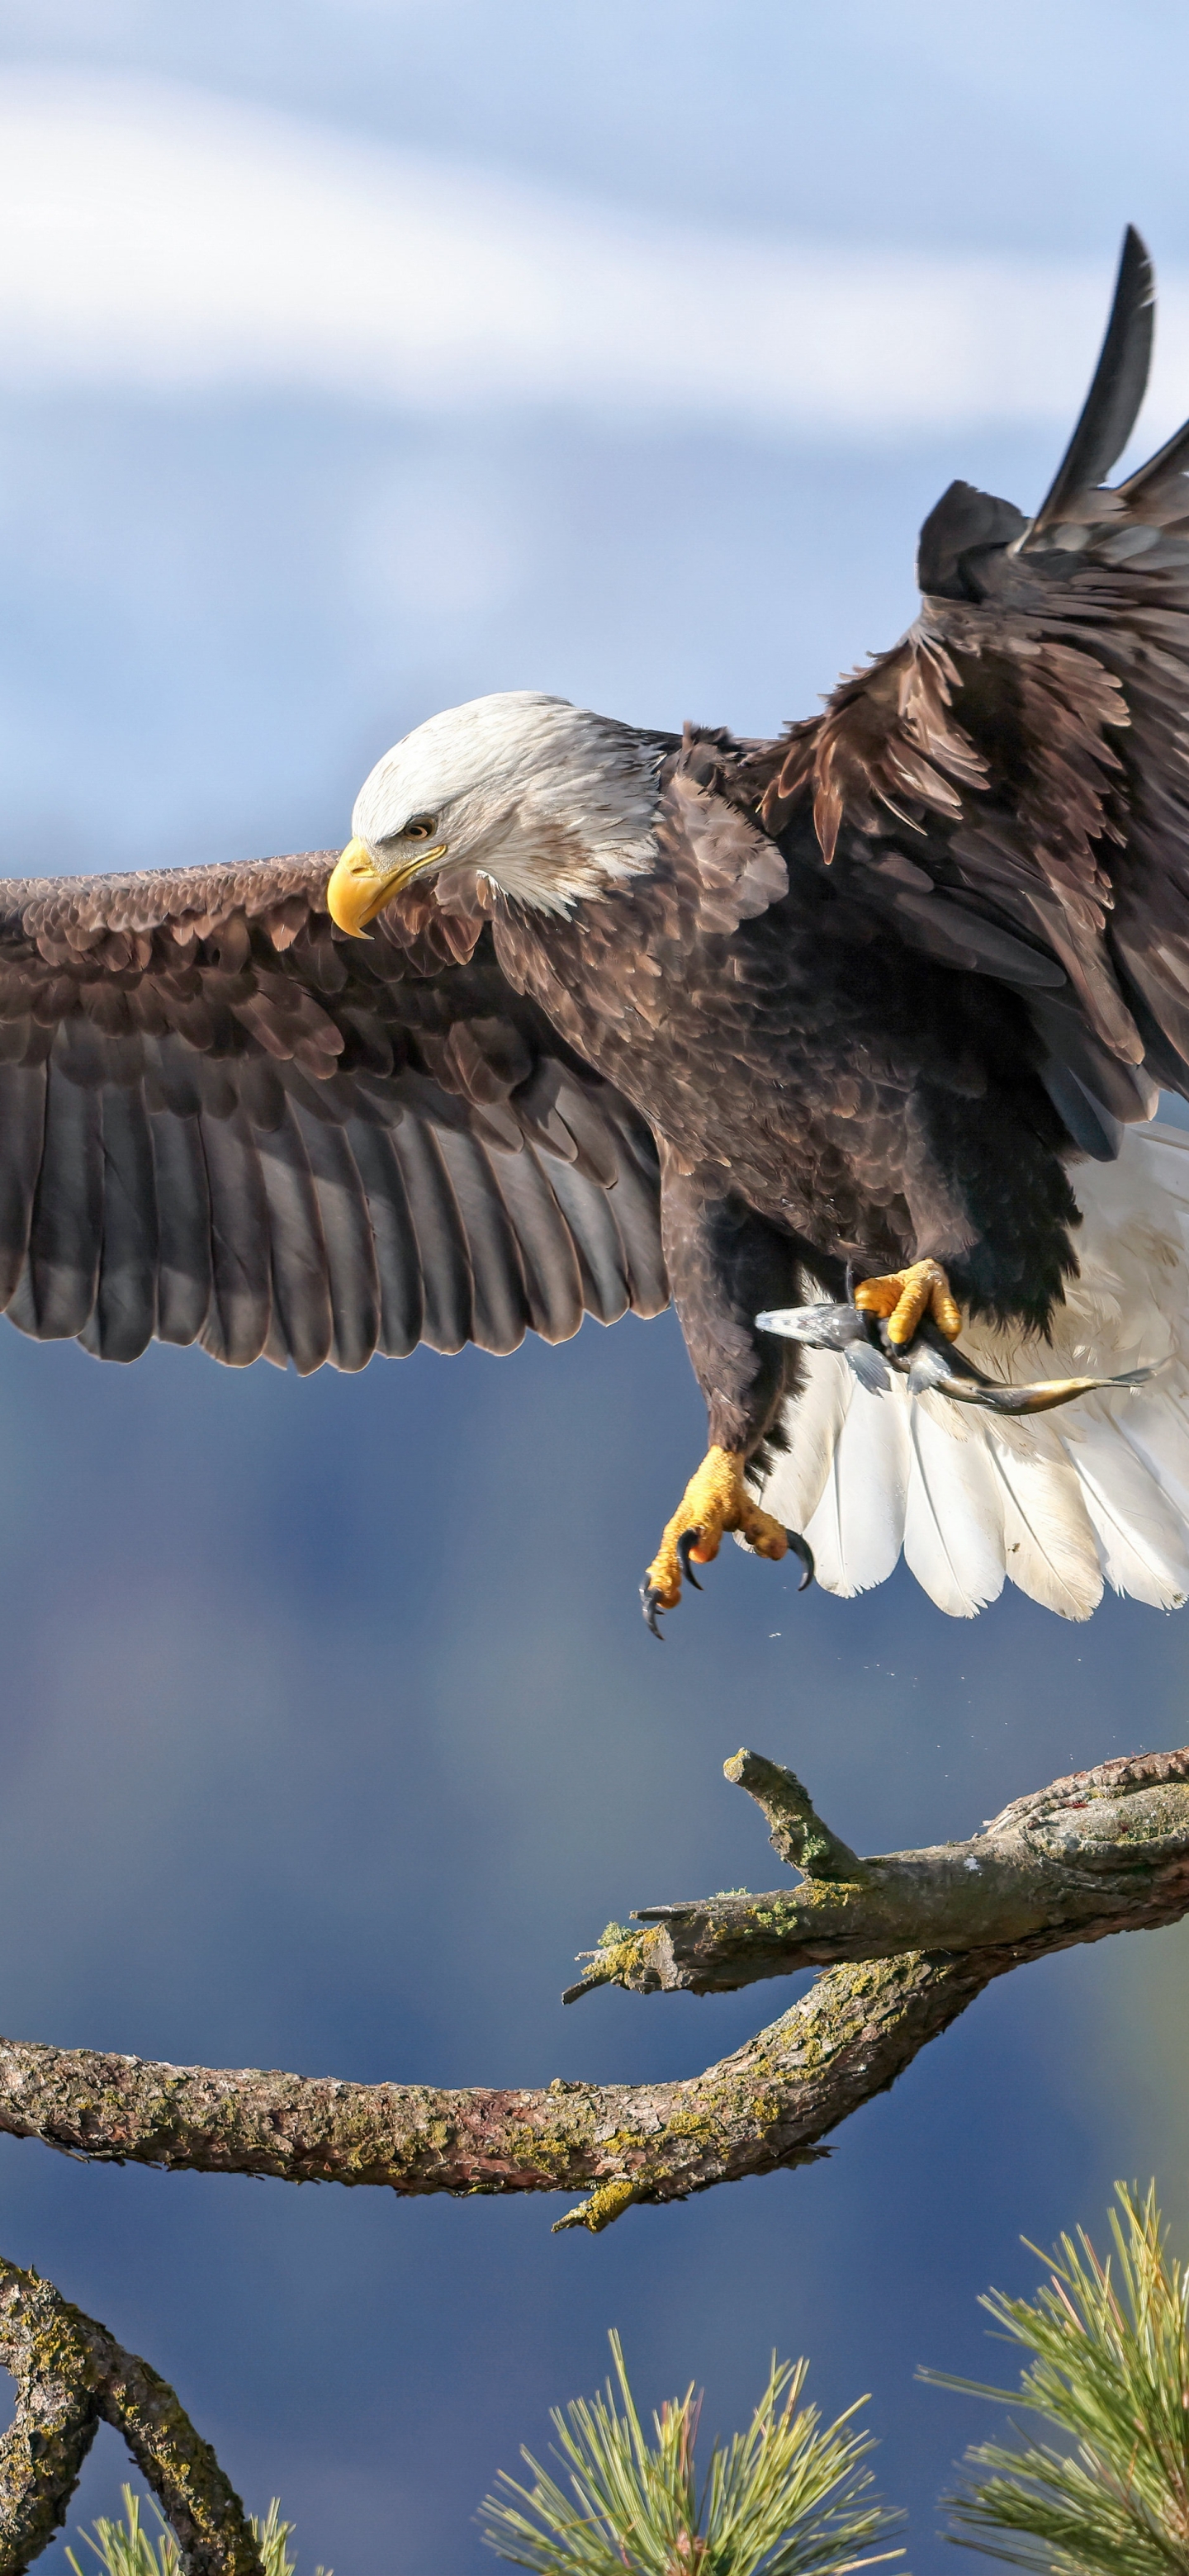 Mobile wallpaper: Birds, Bird, Animal, Bald Eagle, Bird Of Prey, 1179496  download the picture for free.